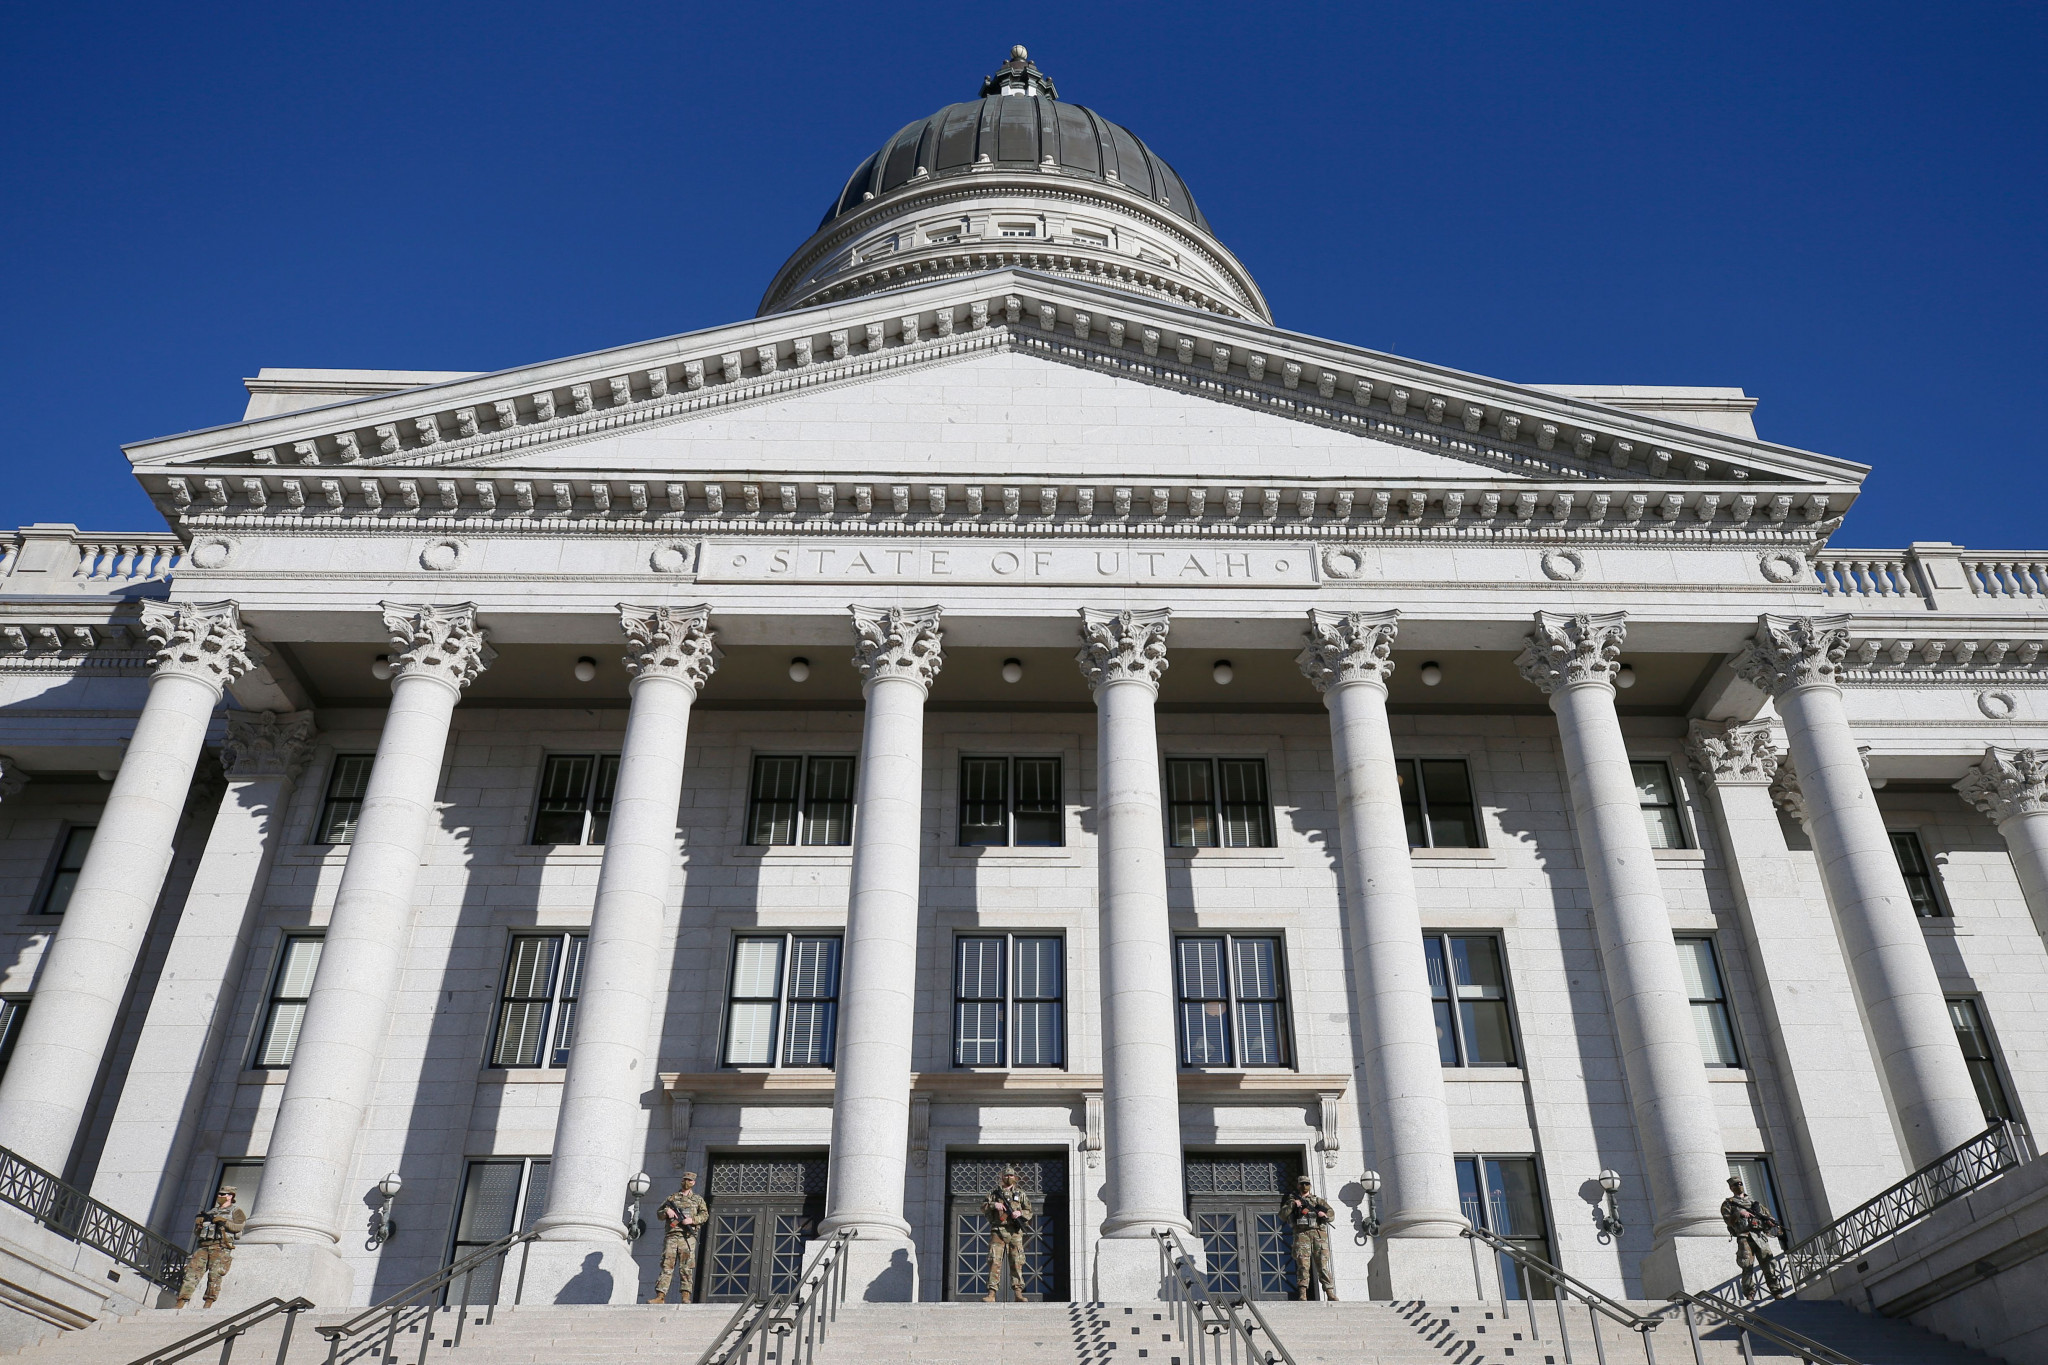 Utah's State Legislature has unanimously approved Bills allowing Salt Lake City to 